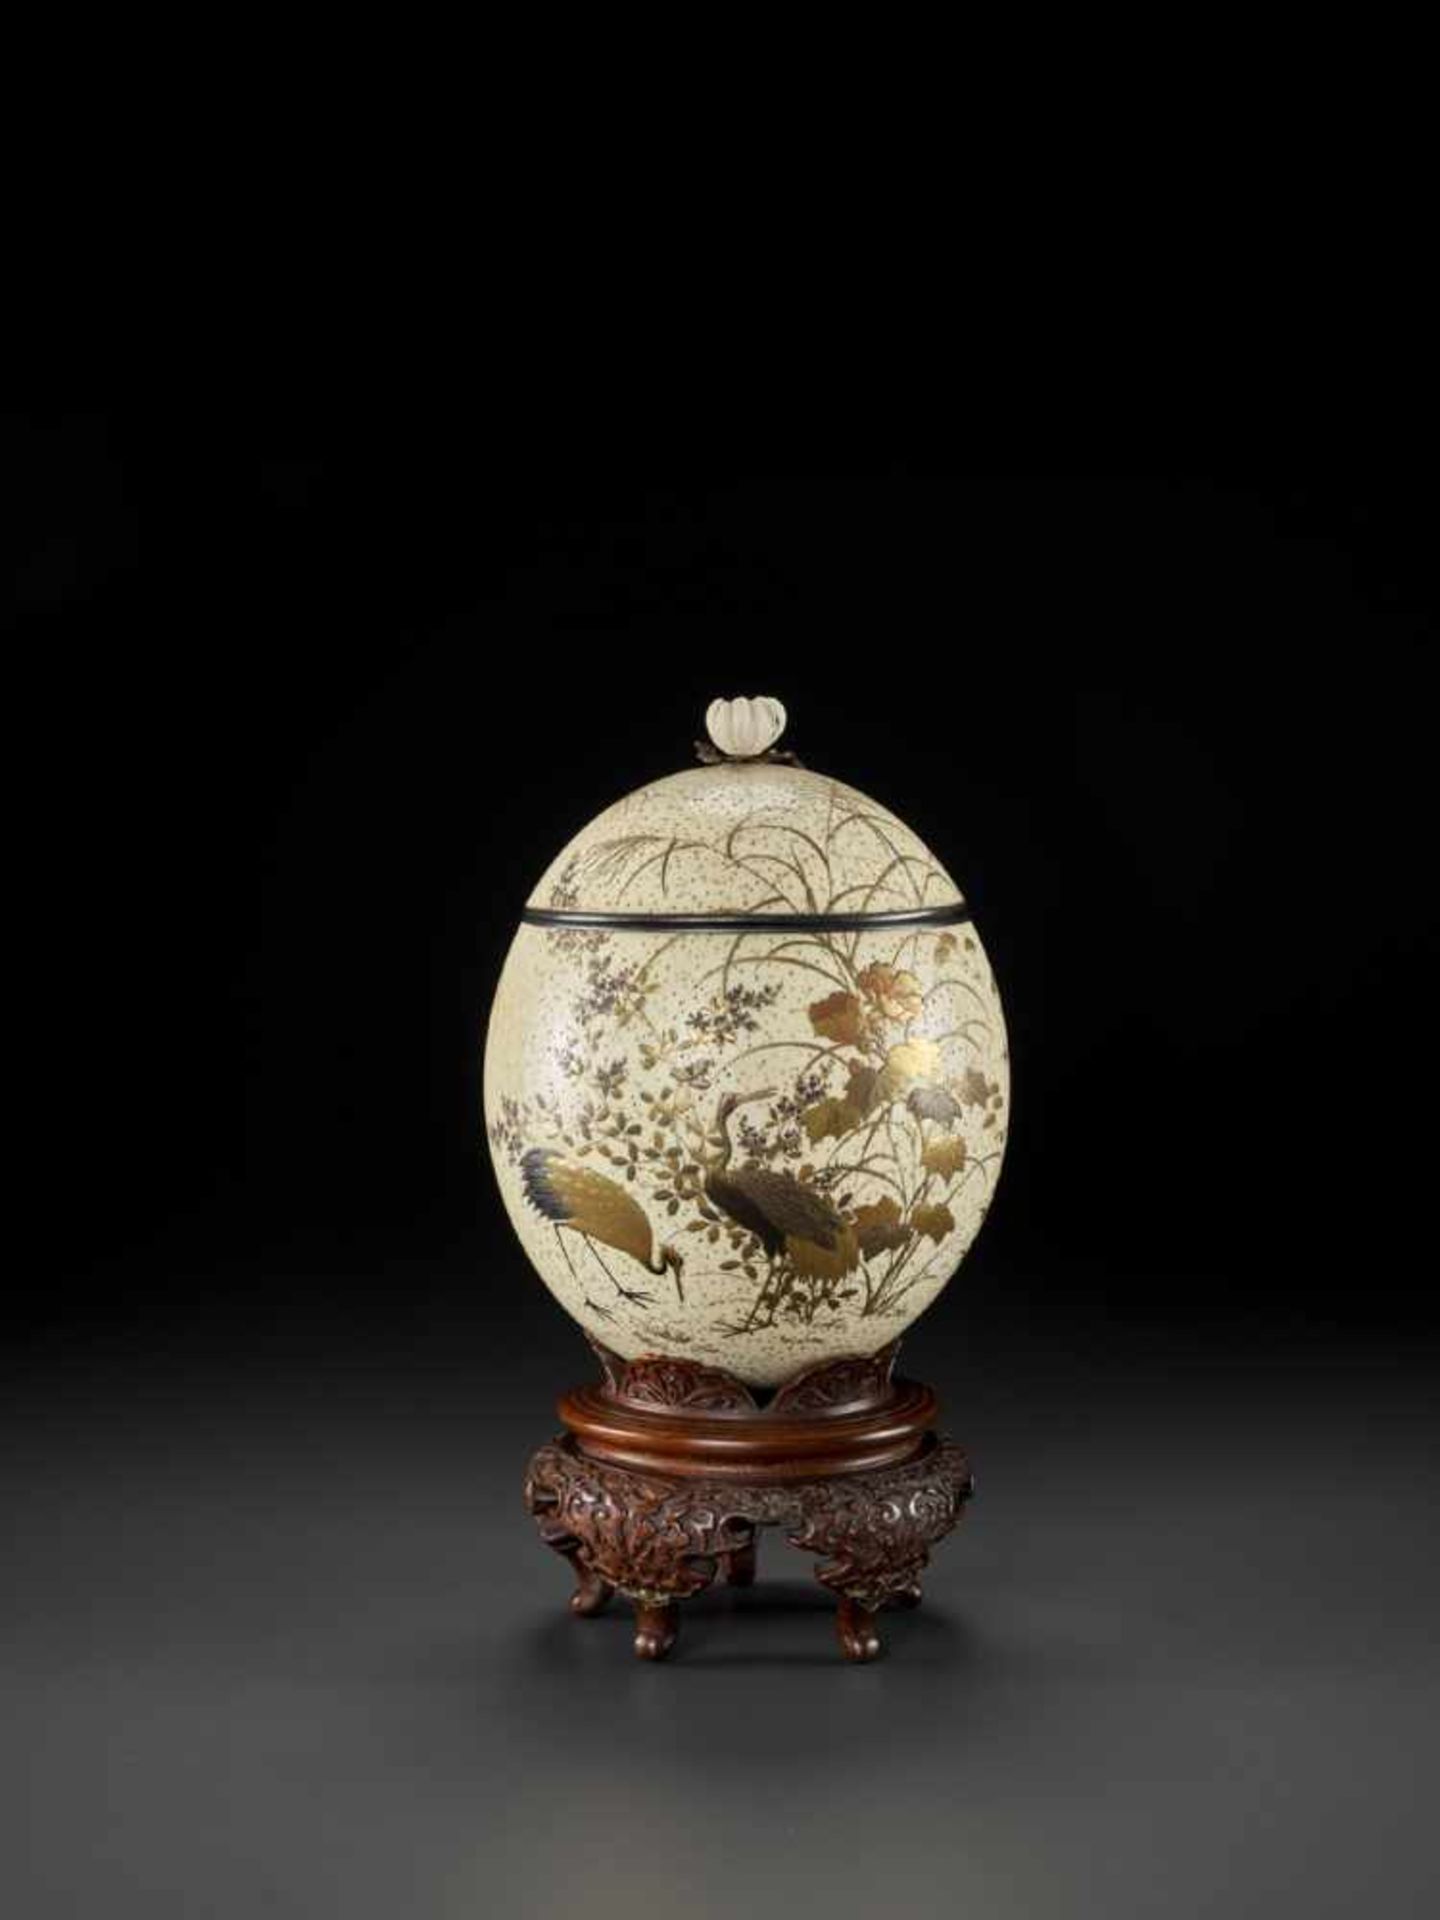 A FINELY LACQUERED OSTRICH EGG Japan, late 19th century, Meiji period (1868-1912)The speckled egg is - Bild 6 aus 10